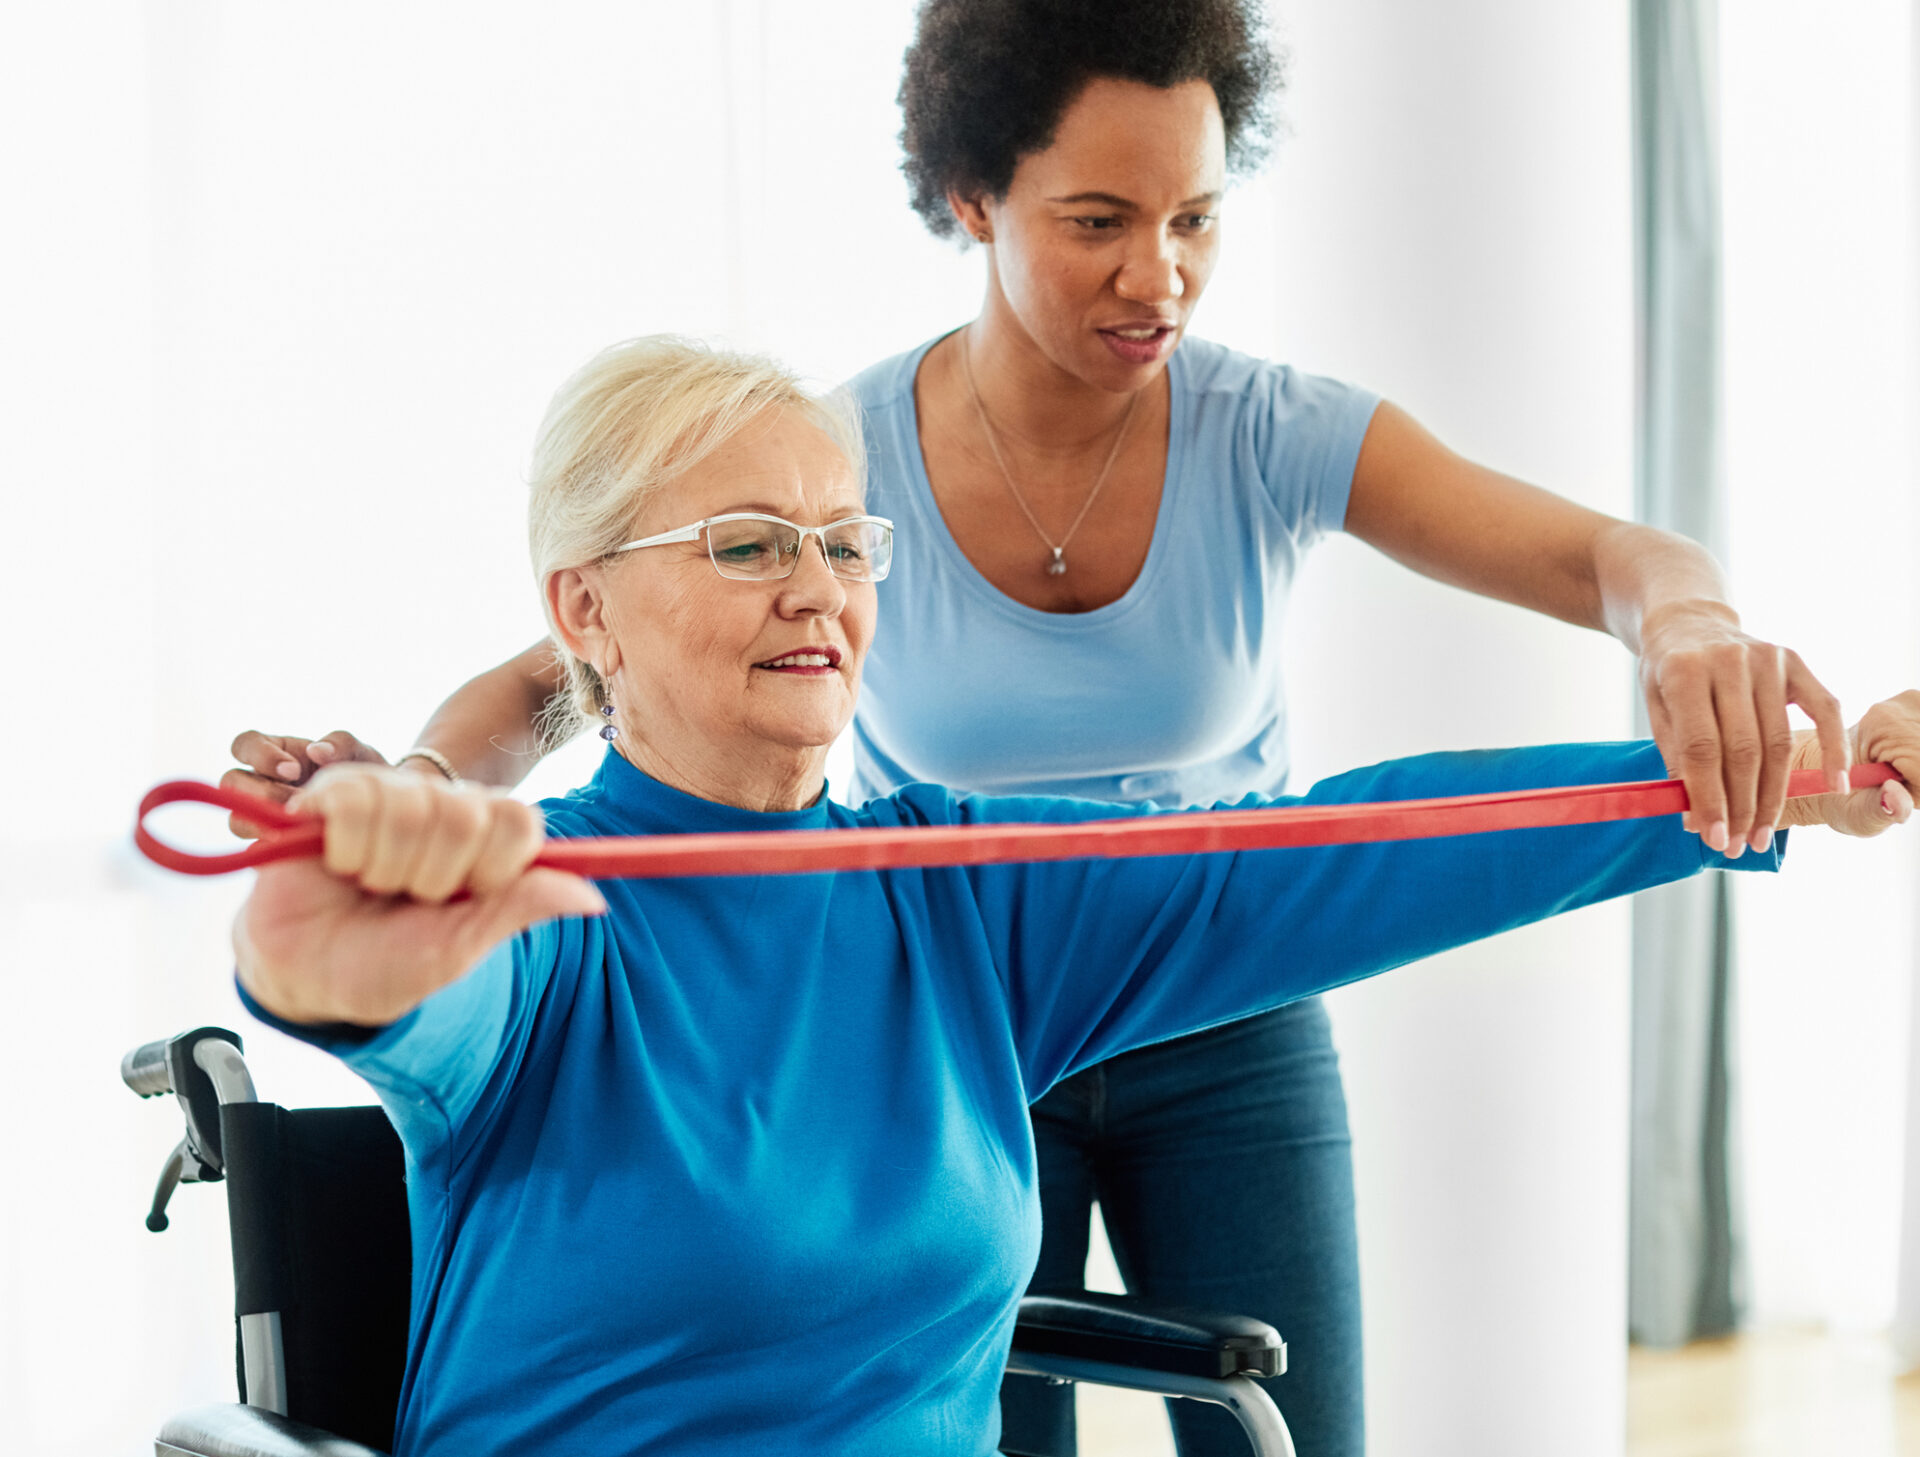 Physical therapist helping woman doing rehabilitation exercise with resistance band